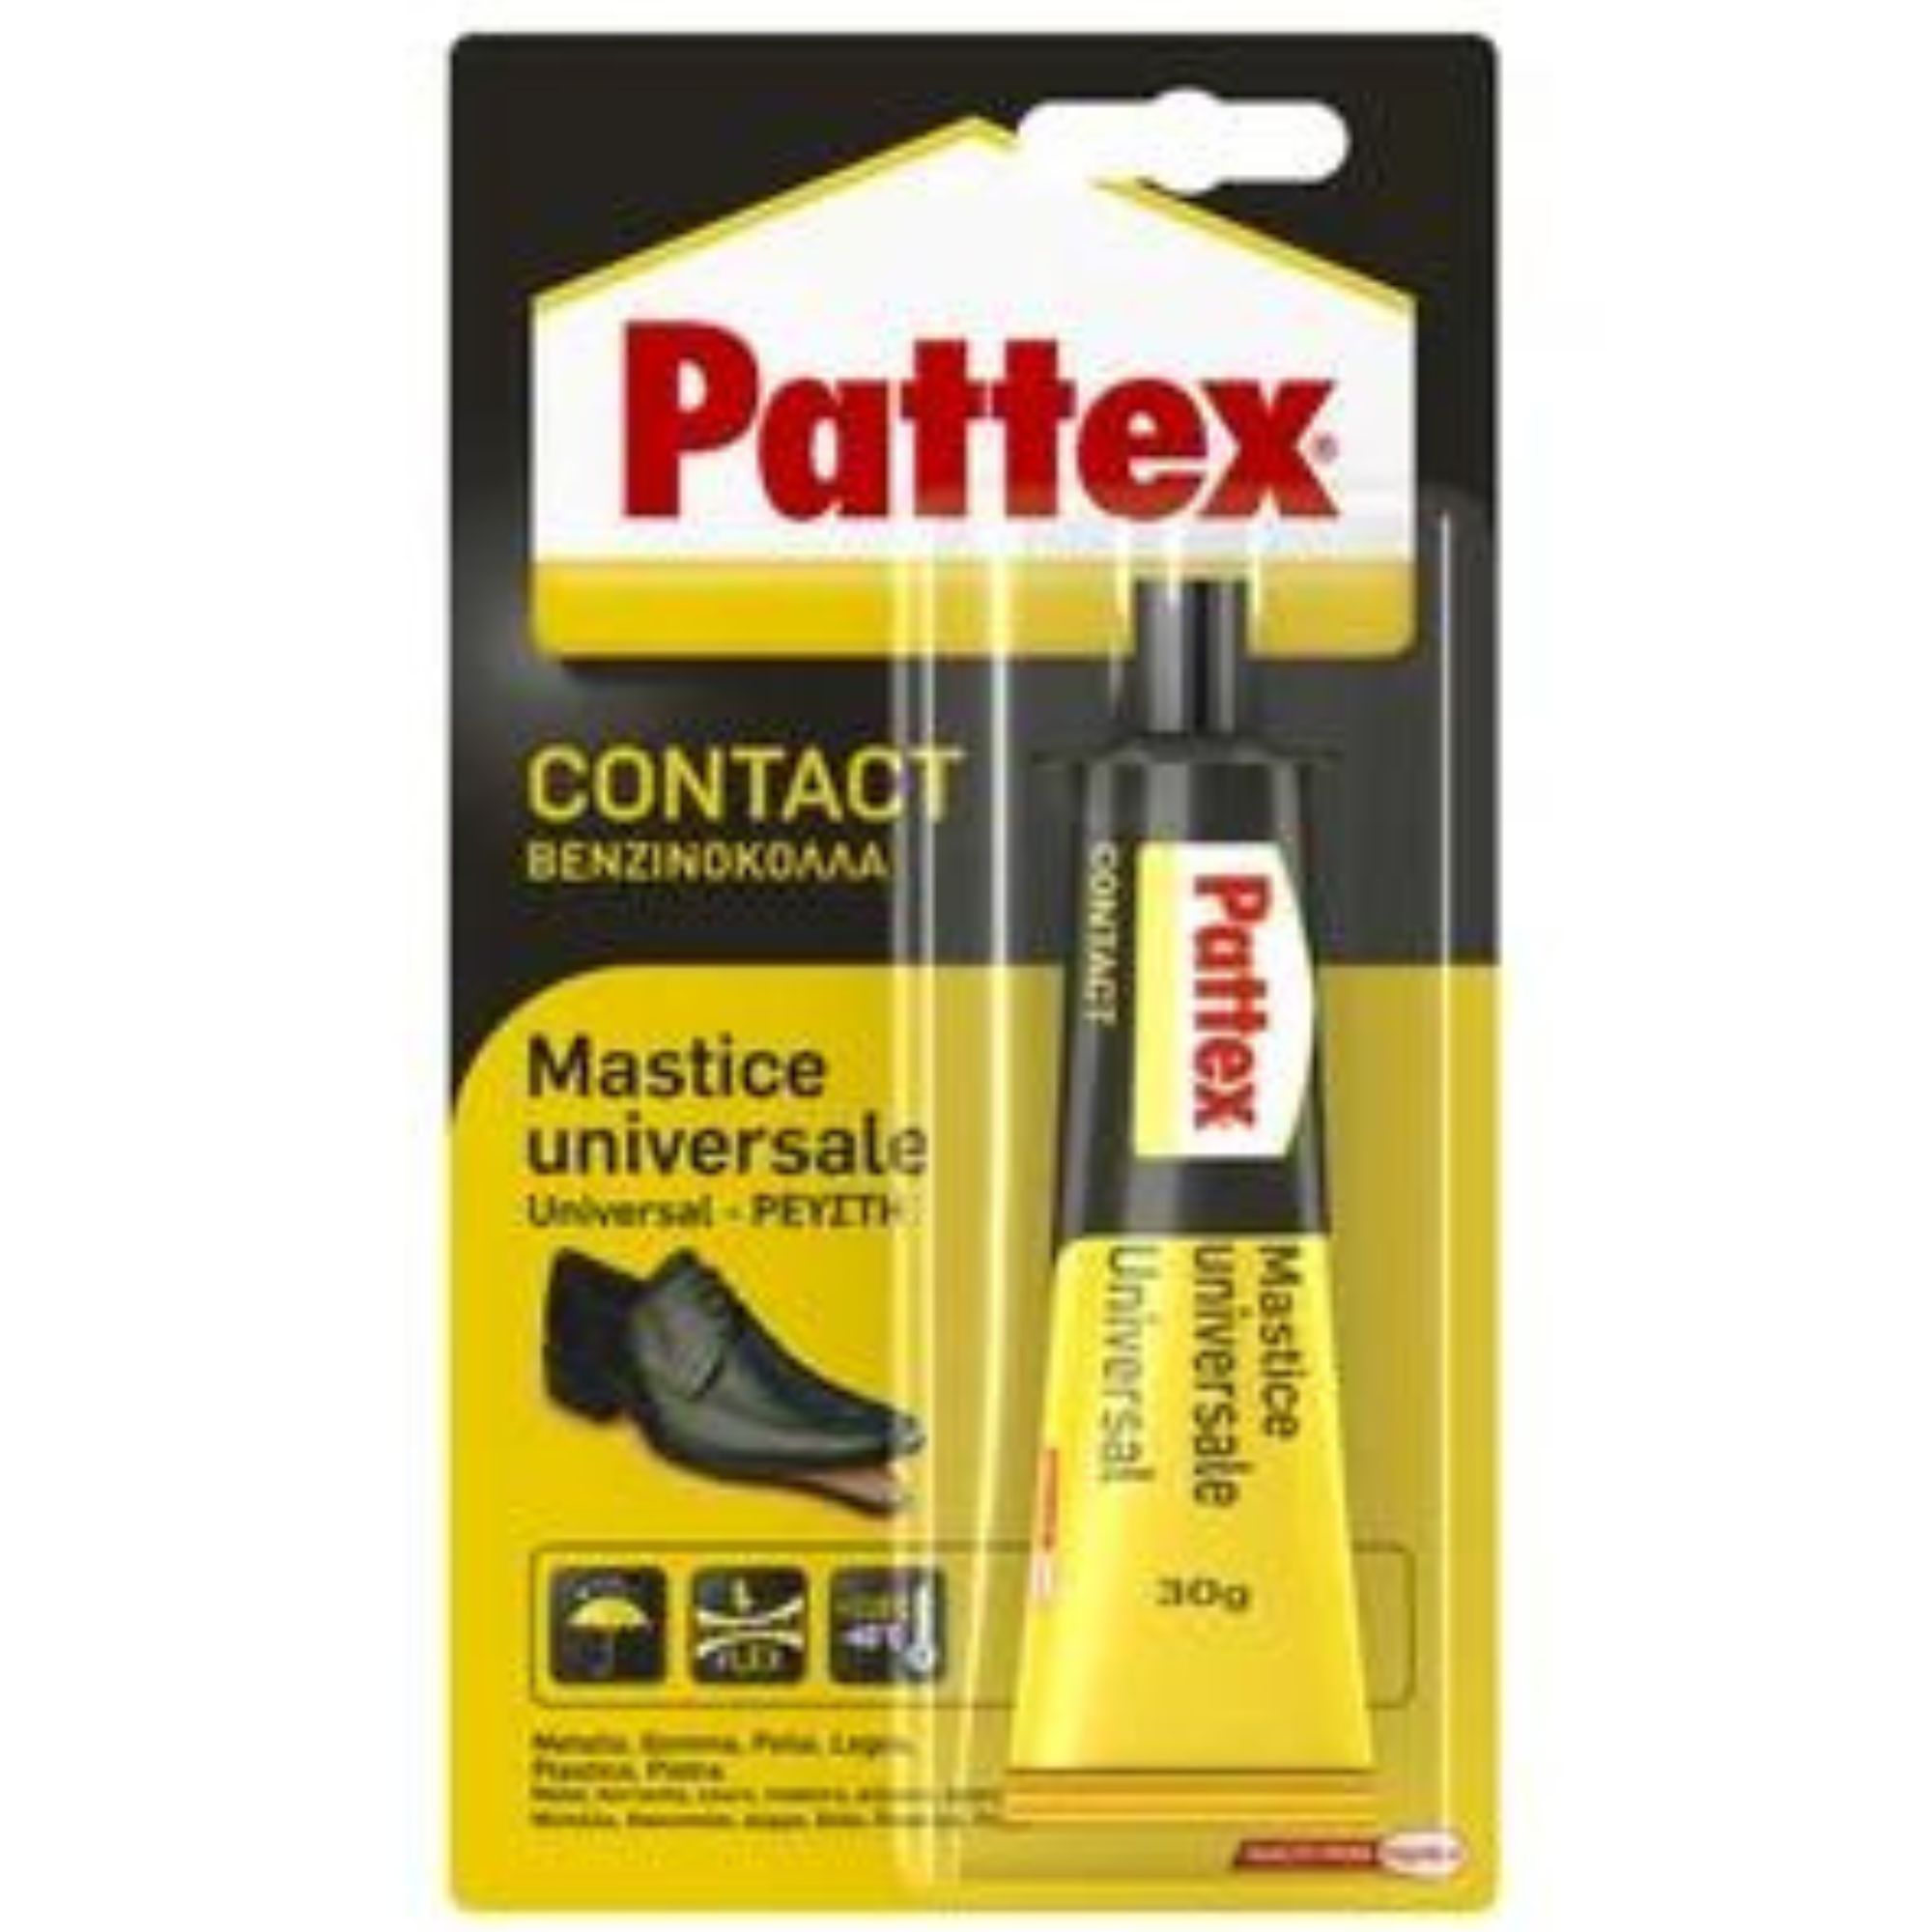 PATTEX COLA CONTACTO BLISTER 30g